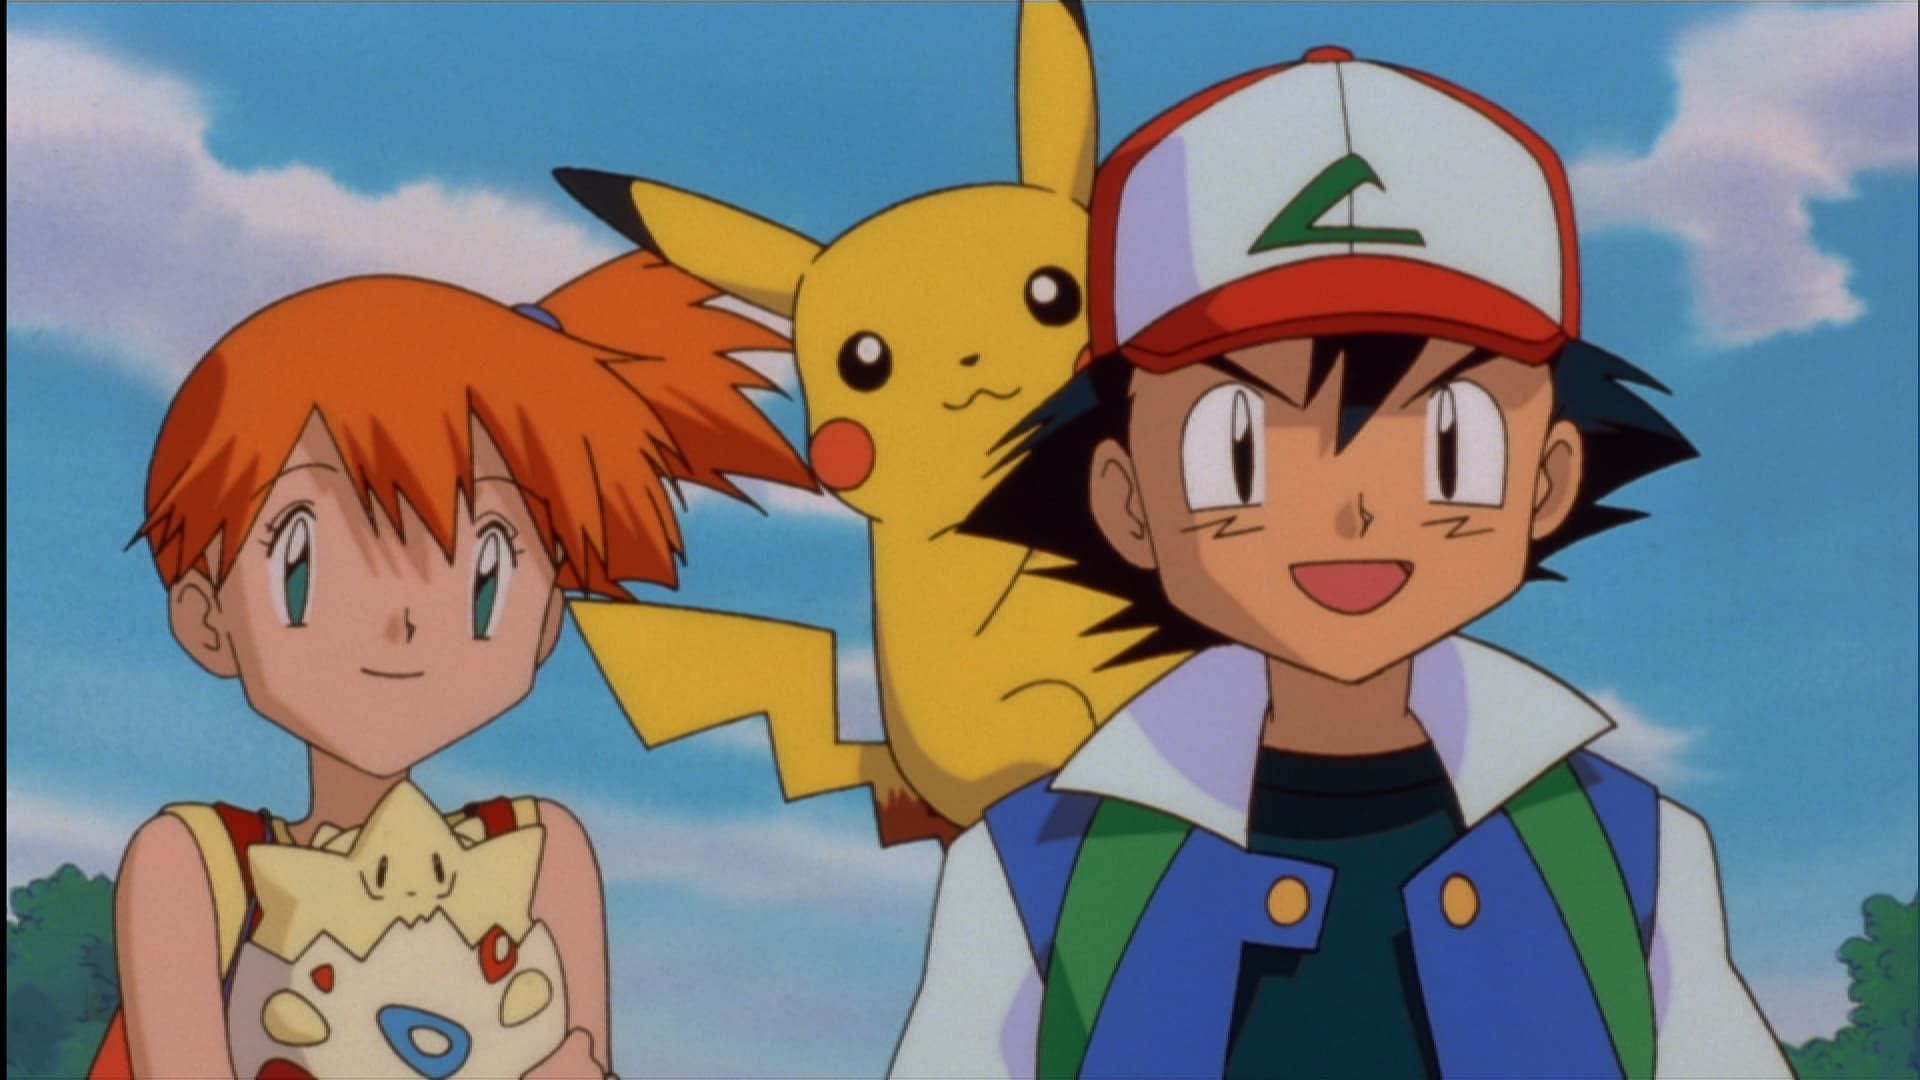 Ash &amp; Misty was one the first anime ships for many fans (Image via OLM Incorporated, Pokemon: The Indigo League)